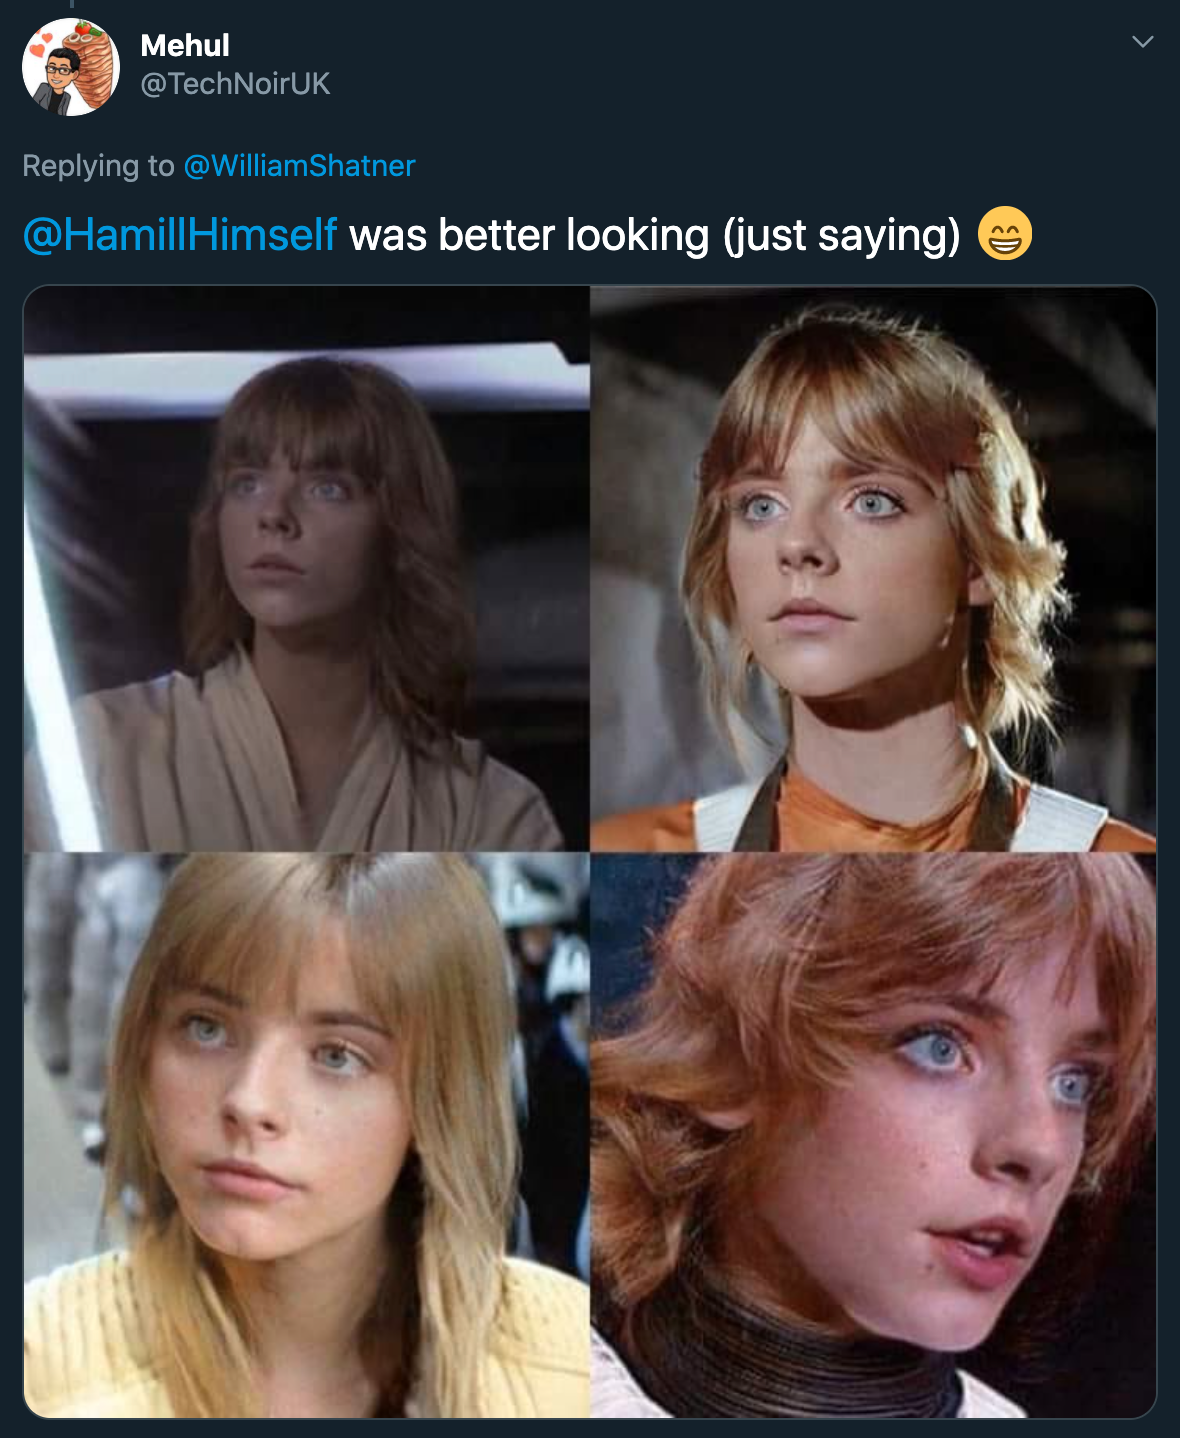 mark hamill was better looking just saying